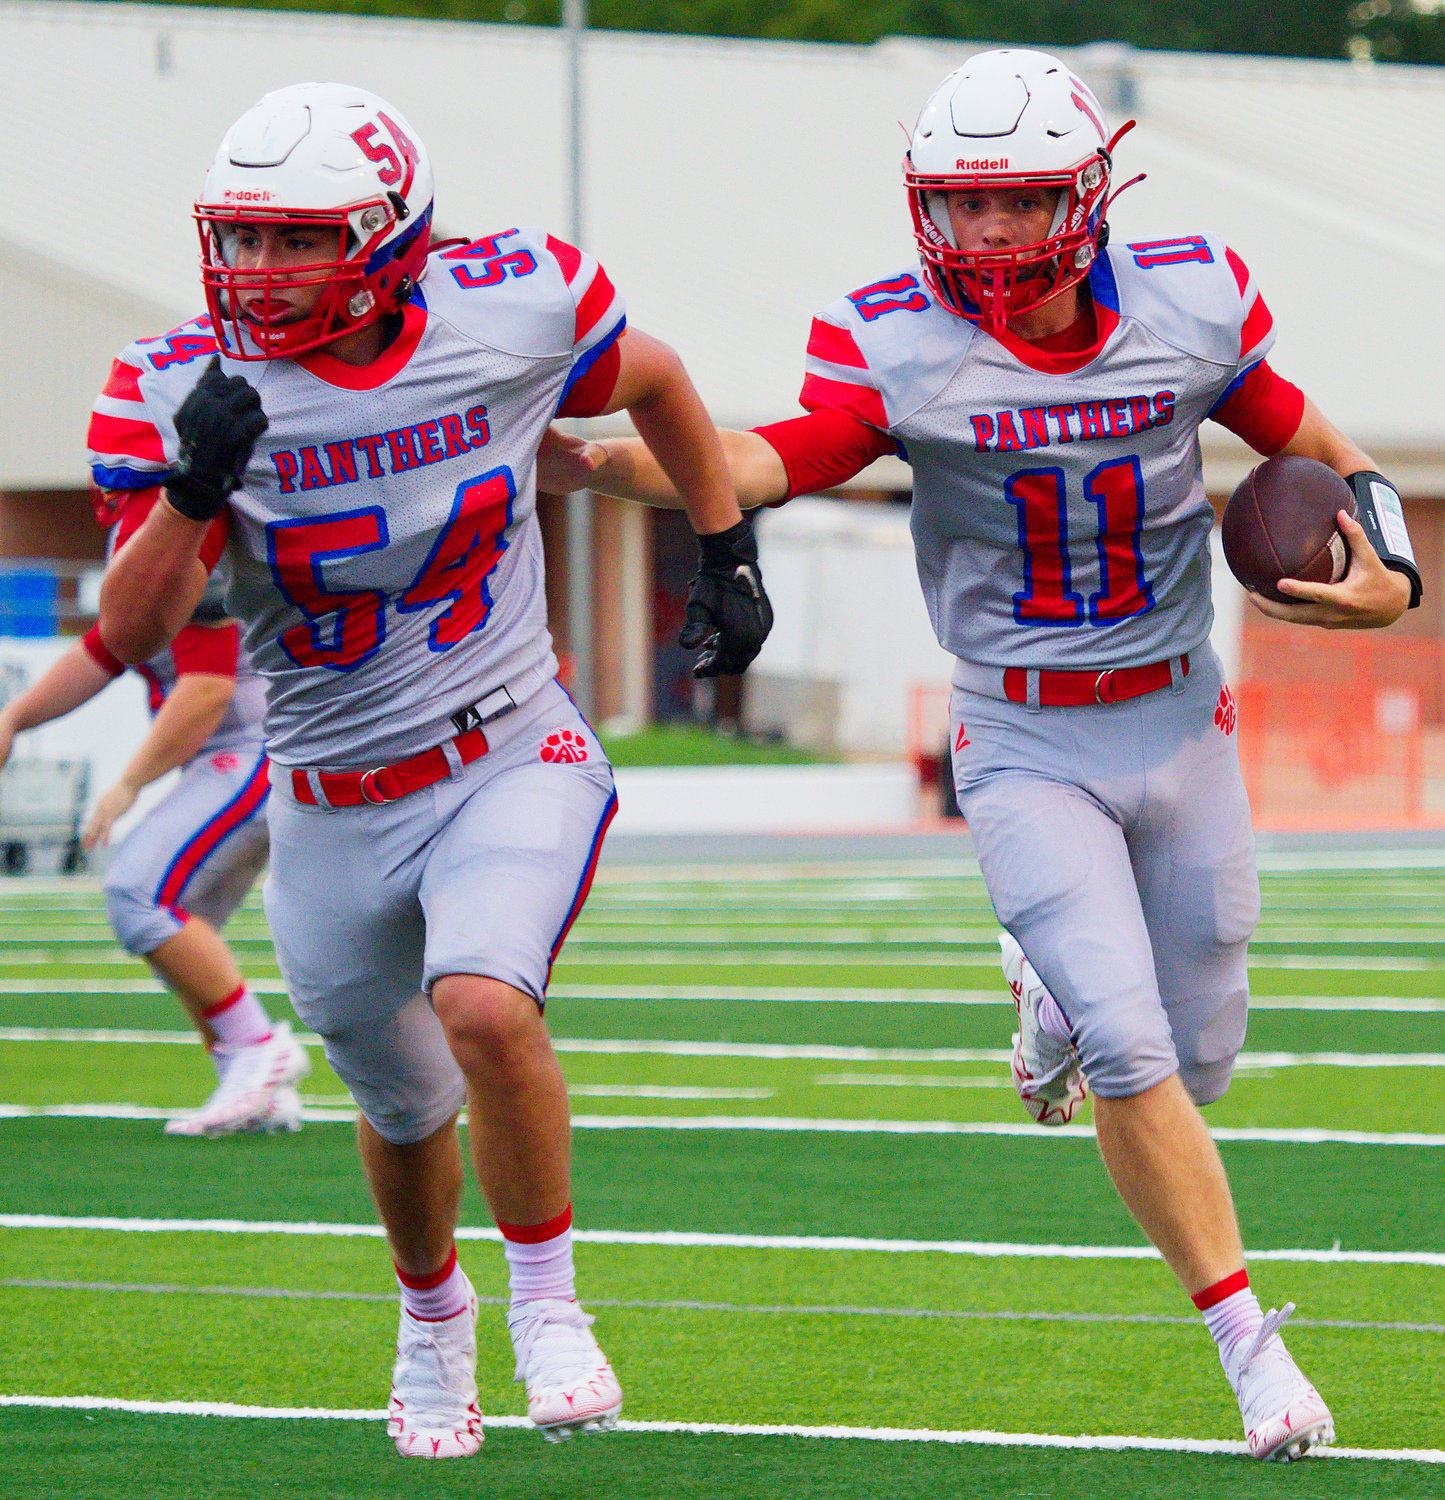 Easton Campbell, named first-team all-district quarterback, follows Tyler Perez to the endzone Aug. 25 facing Detriot in Mineola. [see more of the Panthers' memorable season]